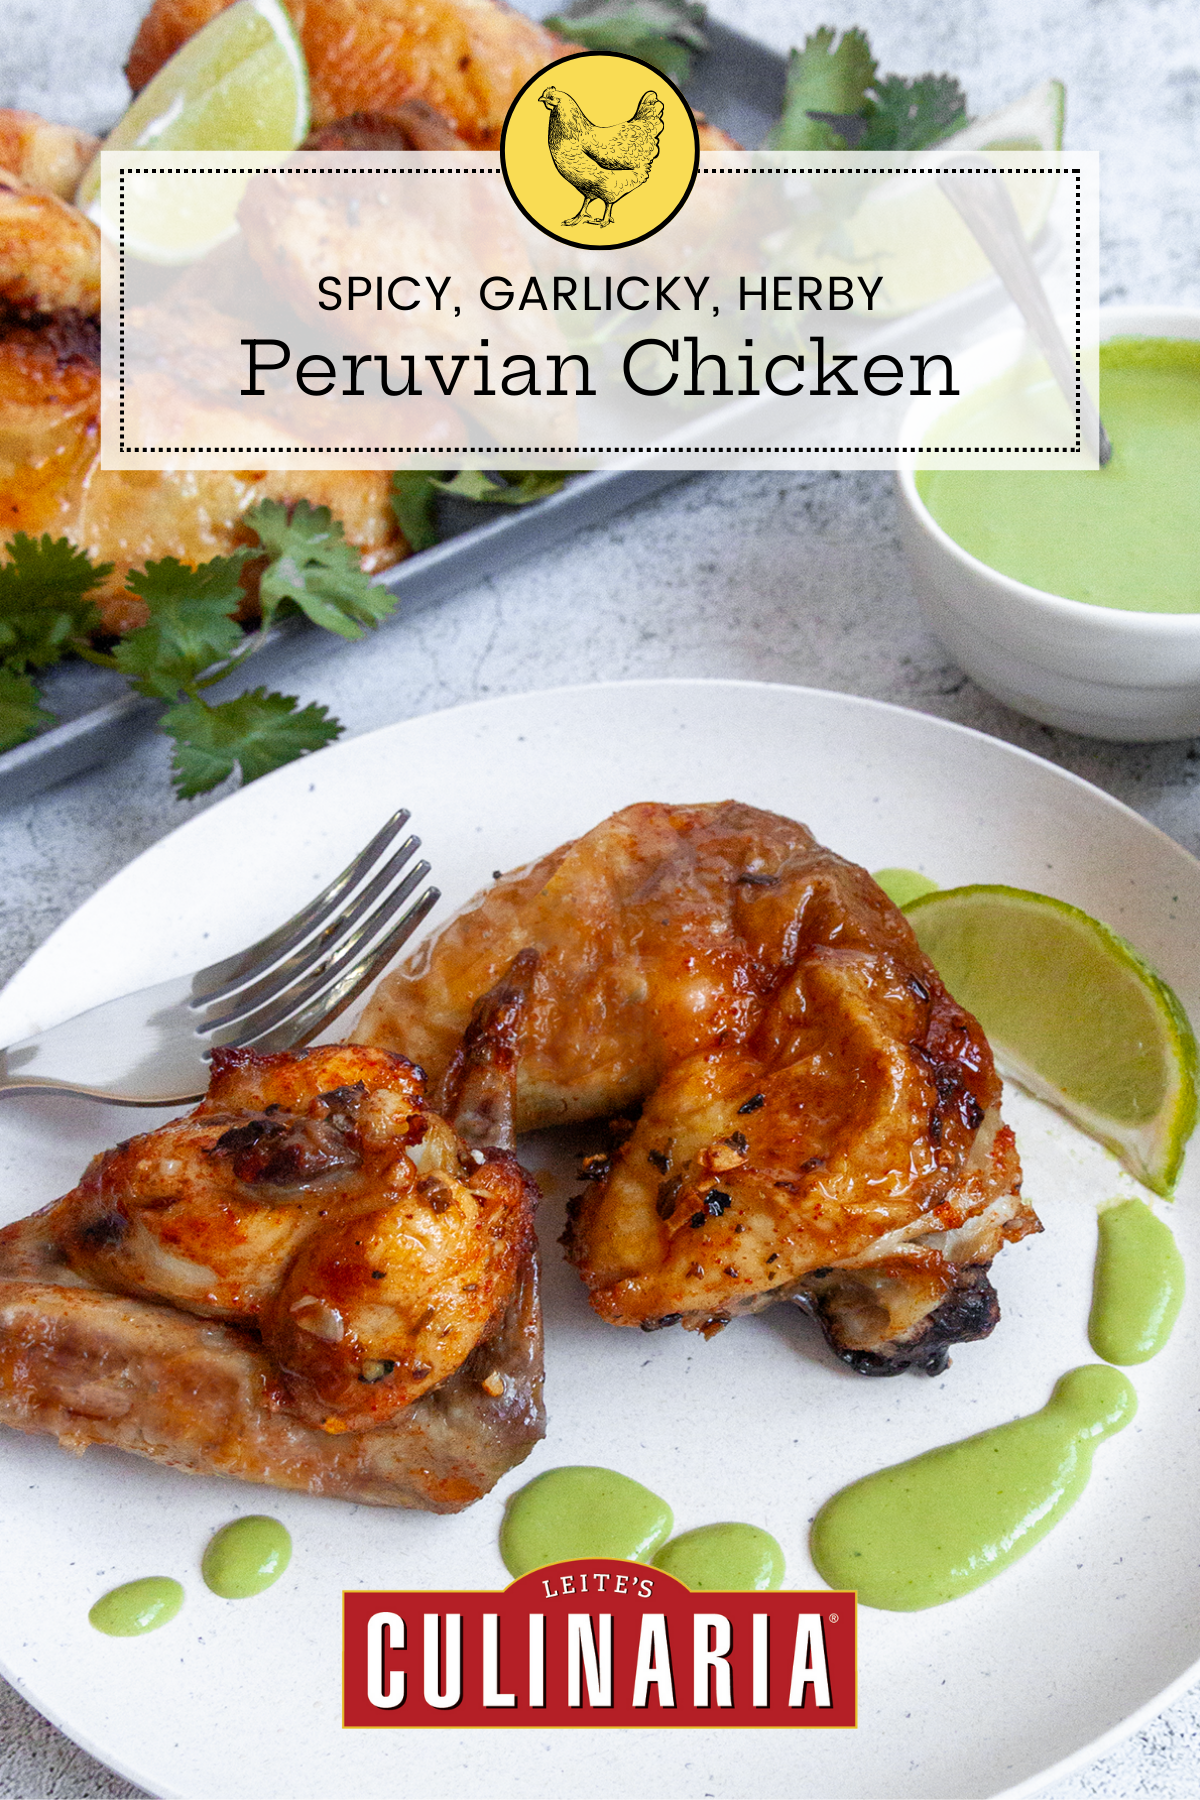 Two pieces of Peruvian chicken on a white plate with green sauce and a lime wedge.